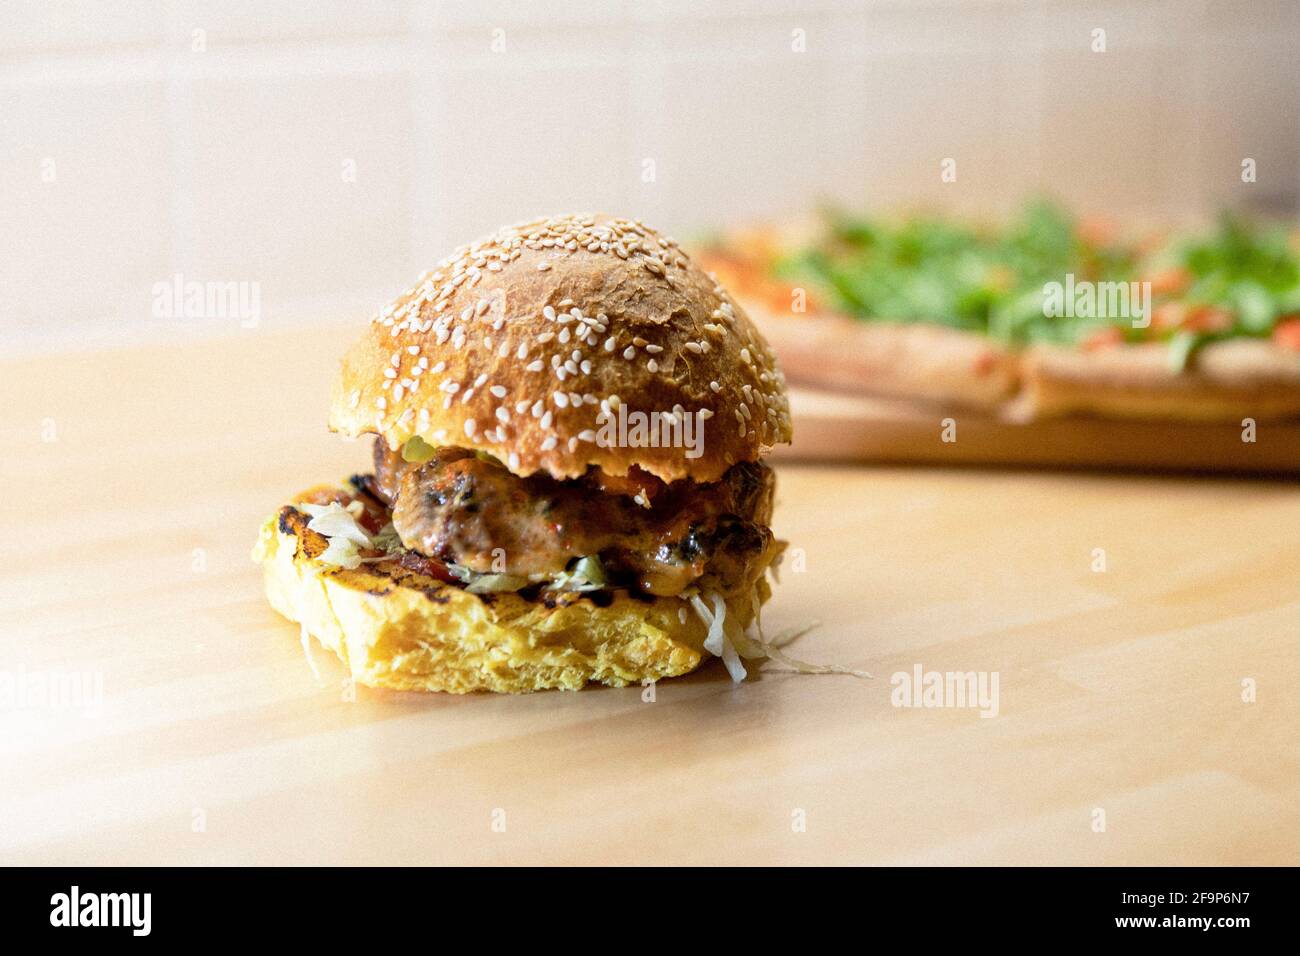 A Mexican beef burger with a pizza in the background Stock Photo